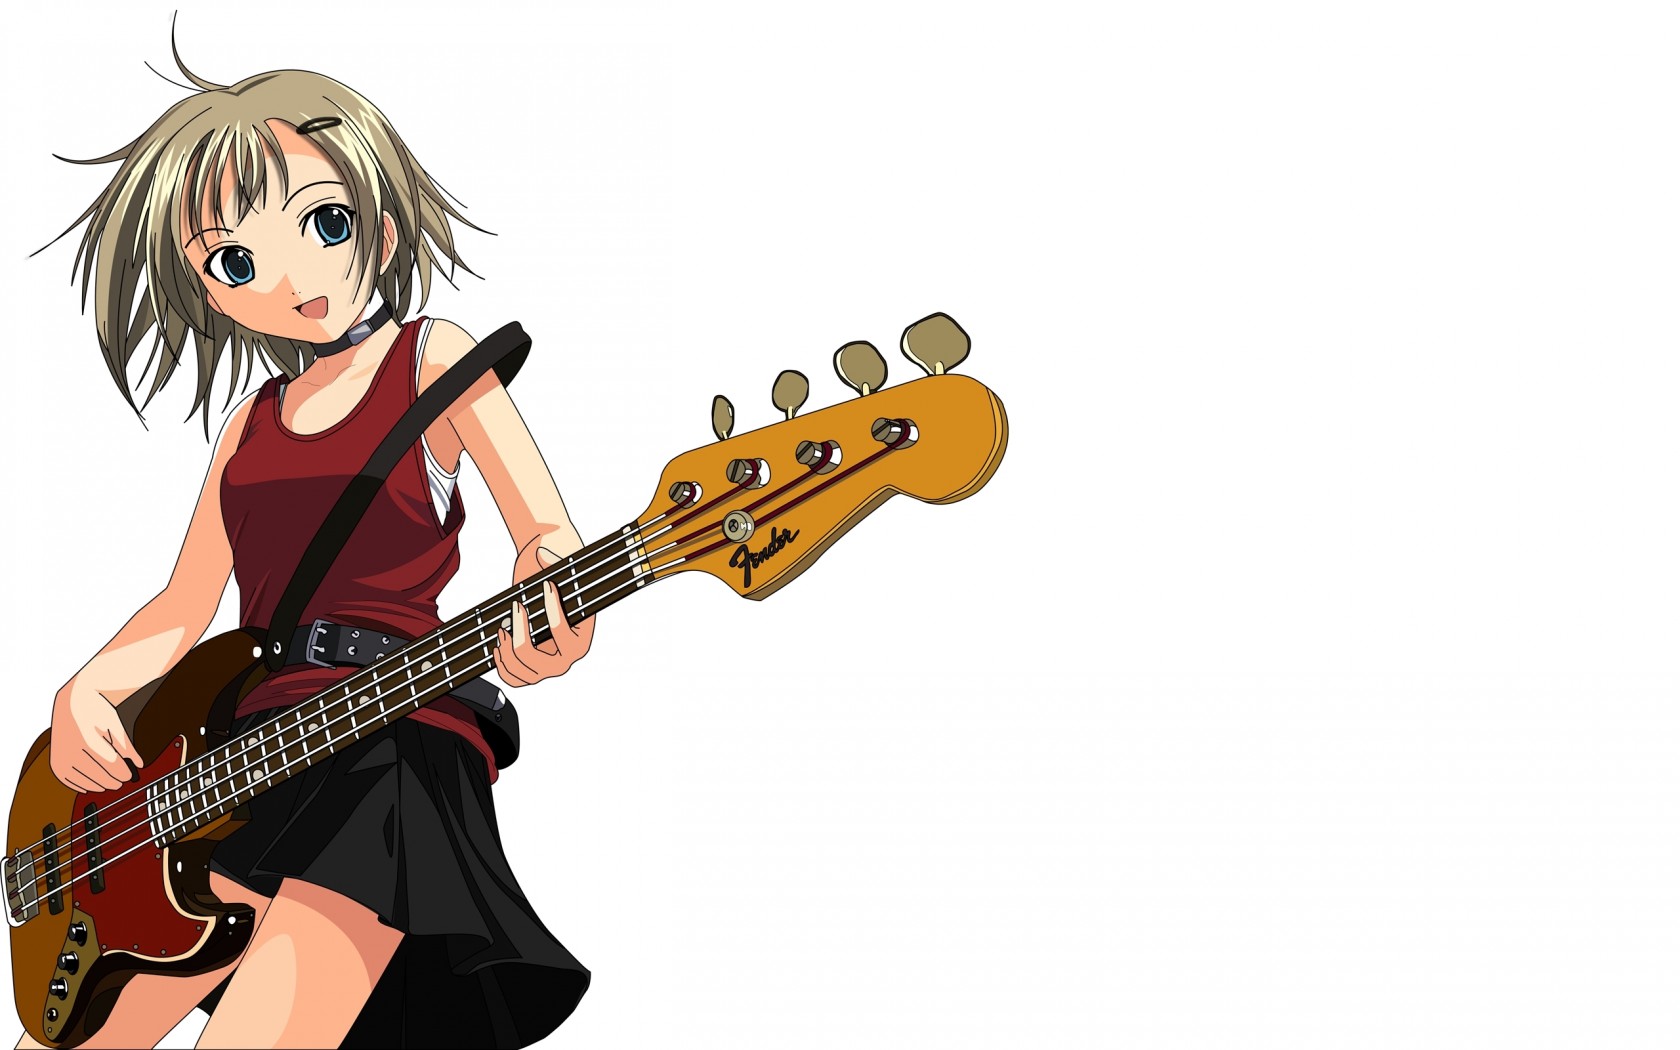 anime Girl guitar music image With Resolutions 16801050 Pixel